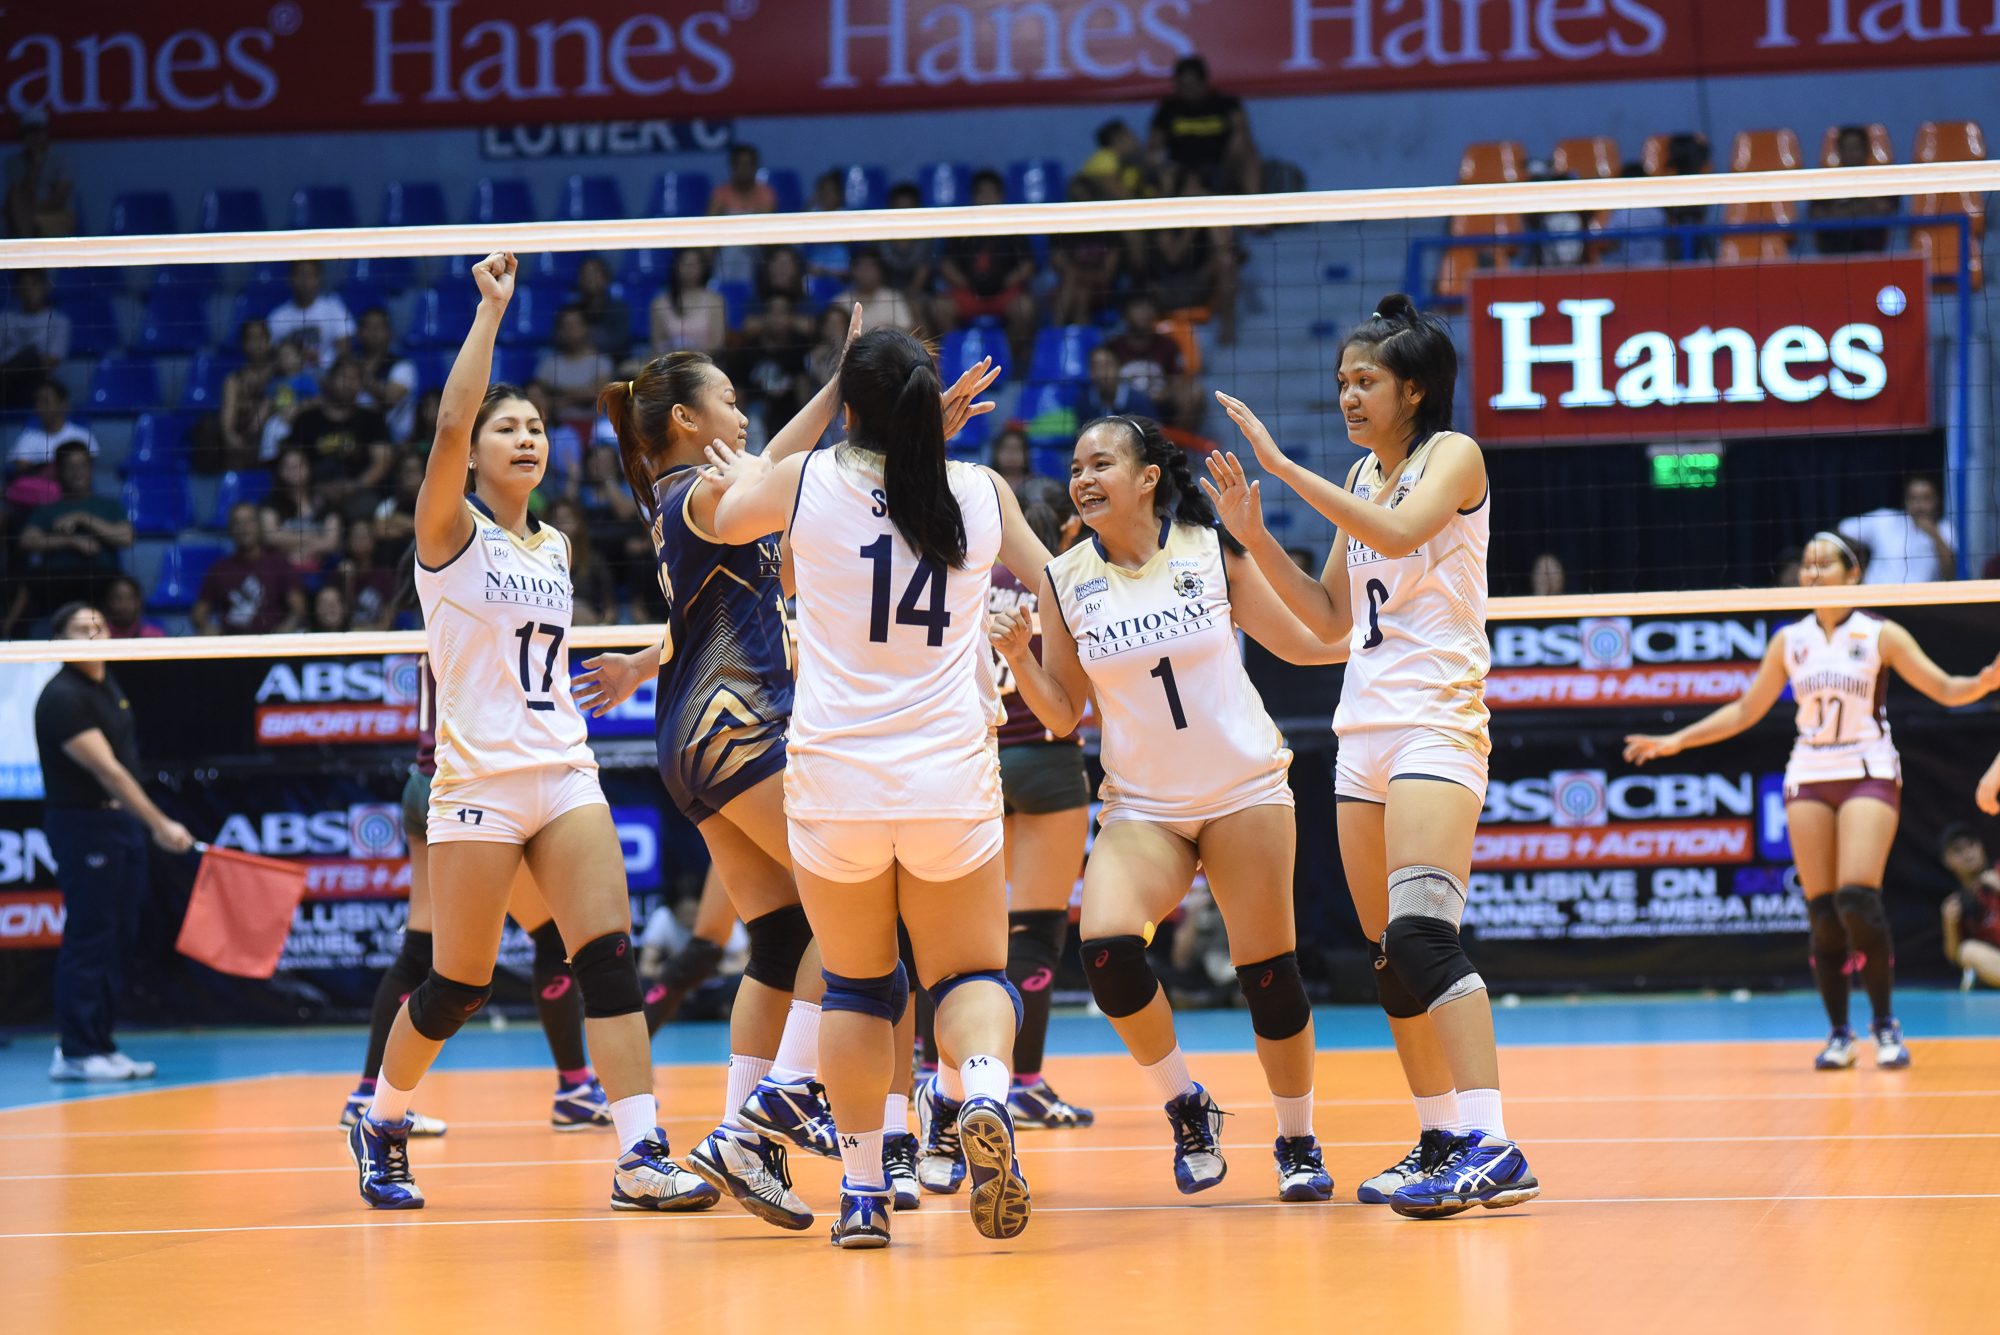 Singh delivers in clutch as NU Lady Bulldogs sweep UP Lady Maroons